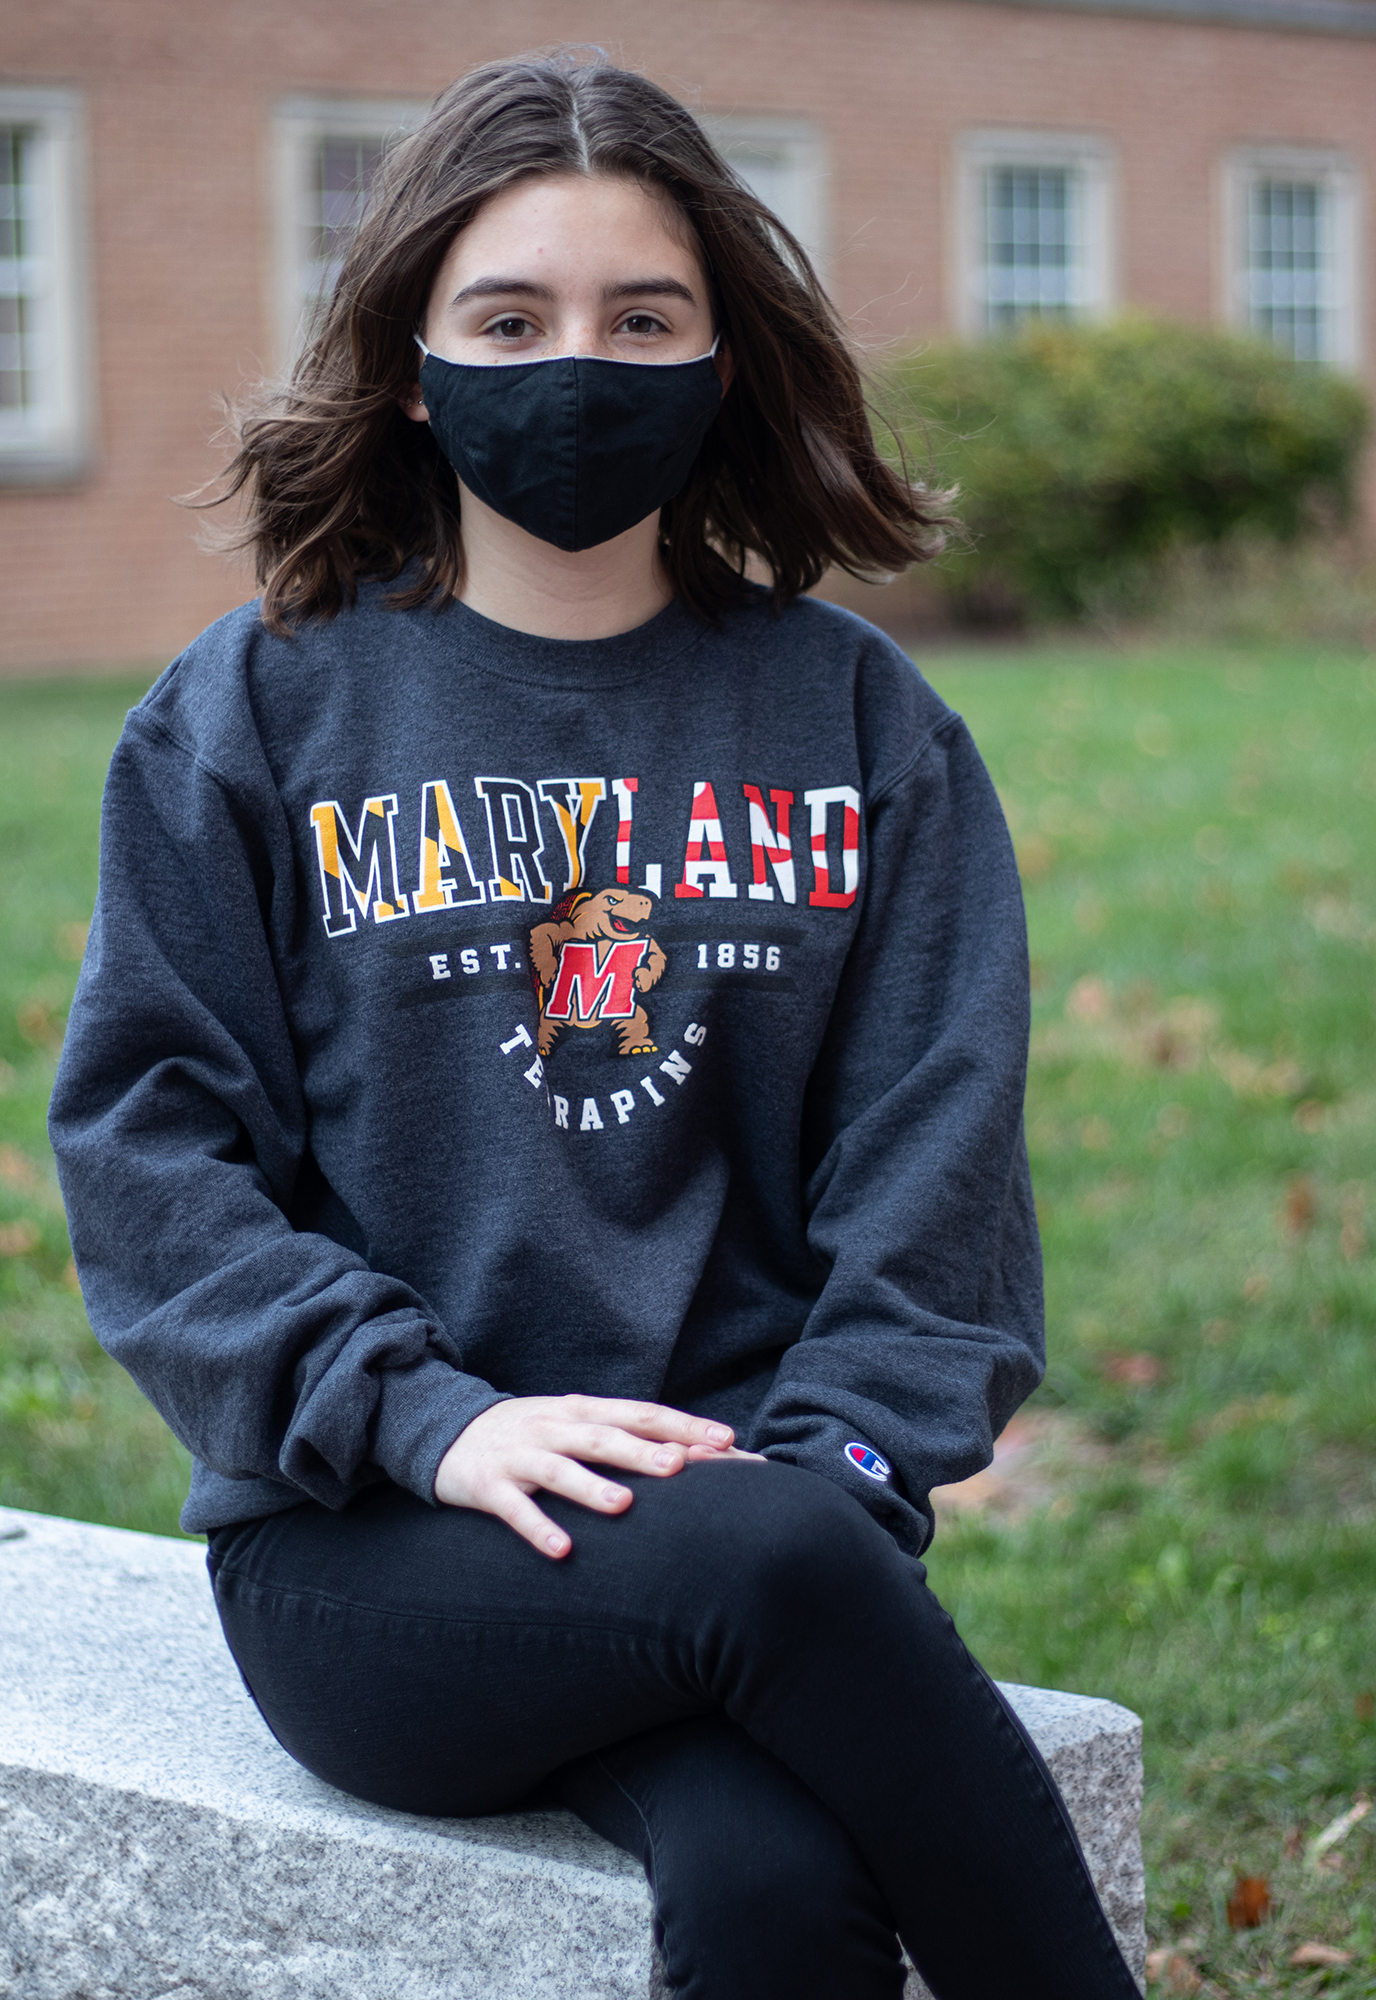 Months after contracting COVID-19, UMD students are dealing with the ...